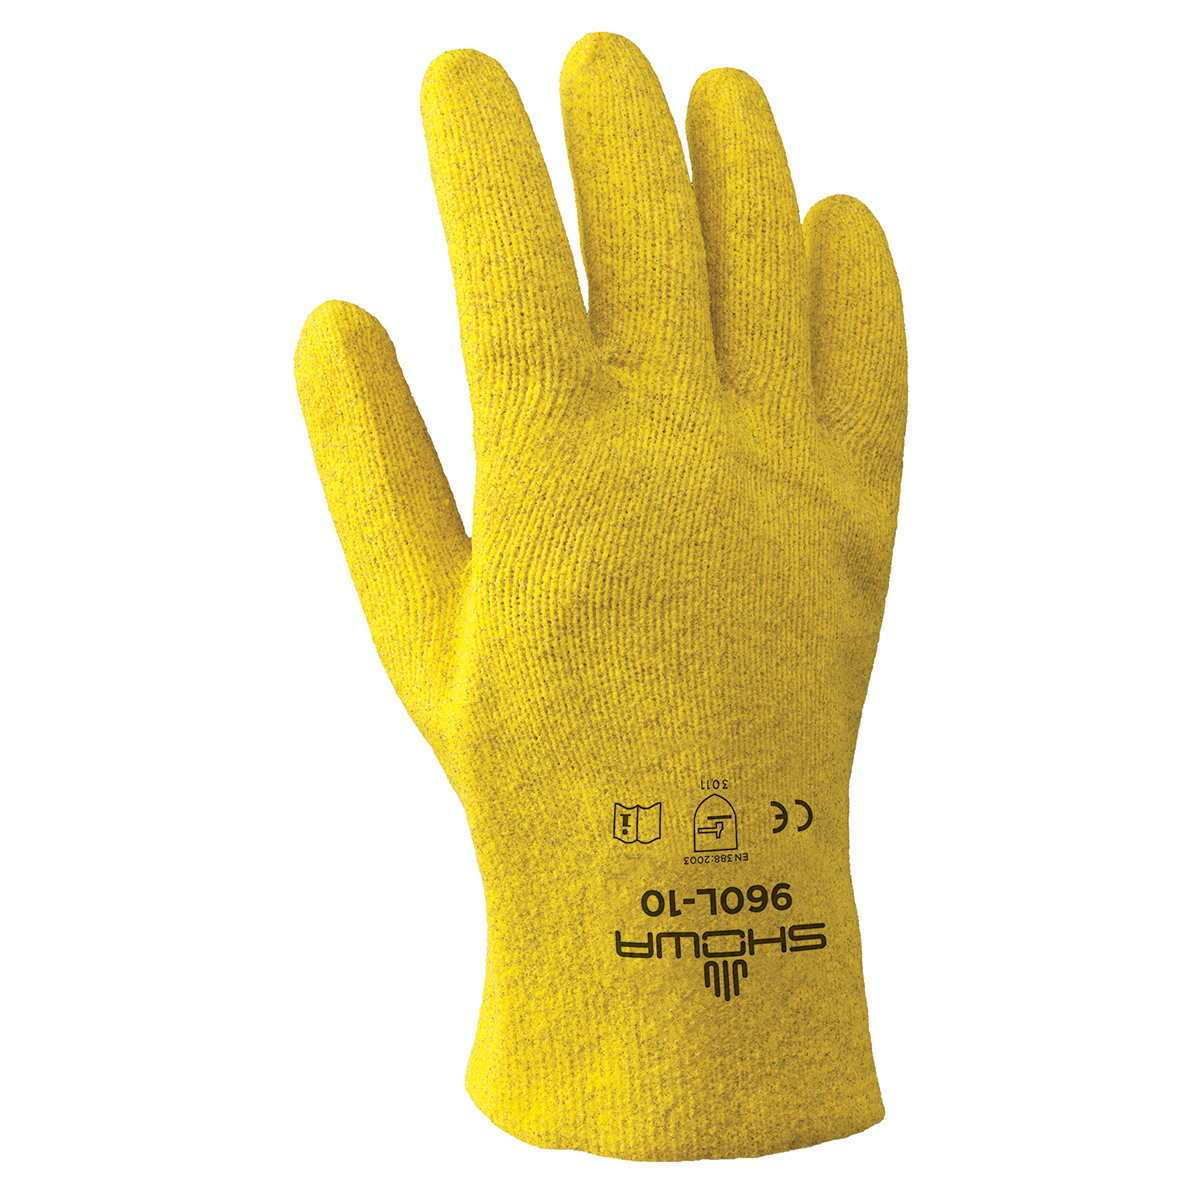 SHOWA® Size 10 Heavy Duty PVC Full Hand Coated Work Gloves With Cotton Liner And Slip-On Cuff